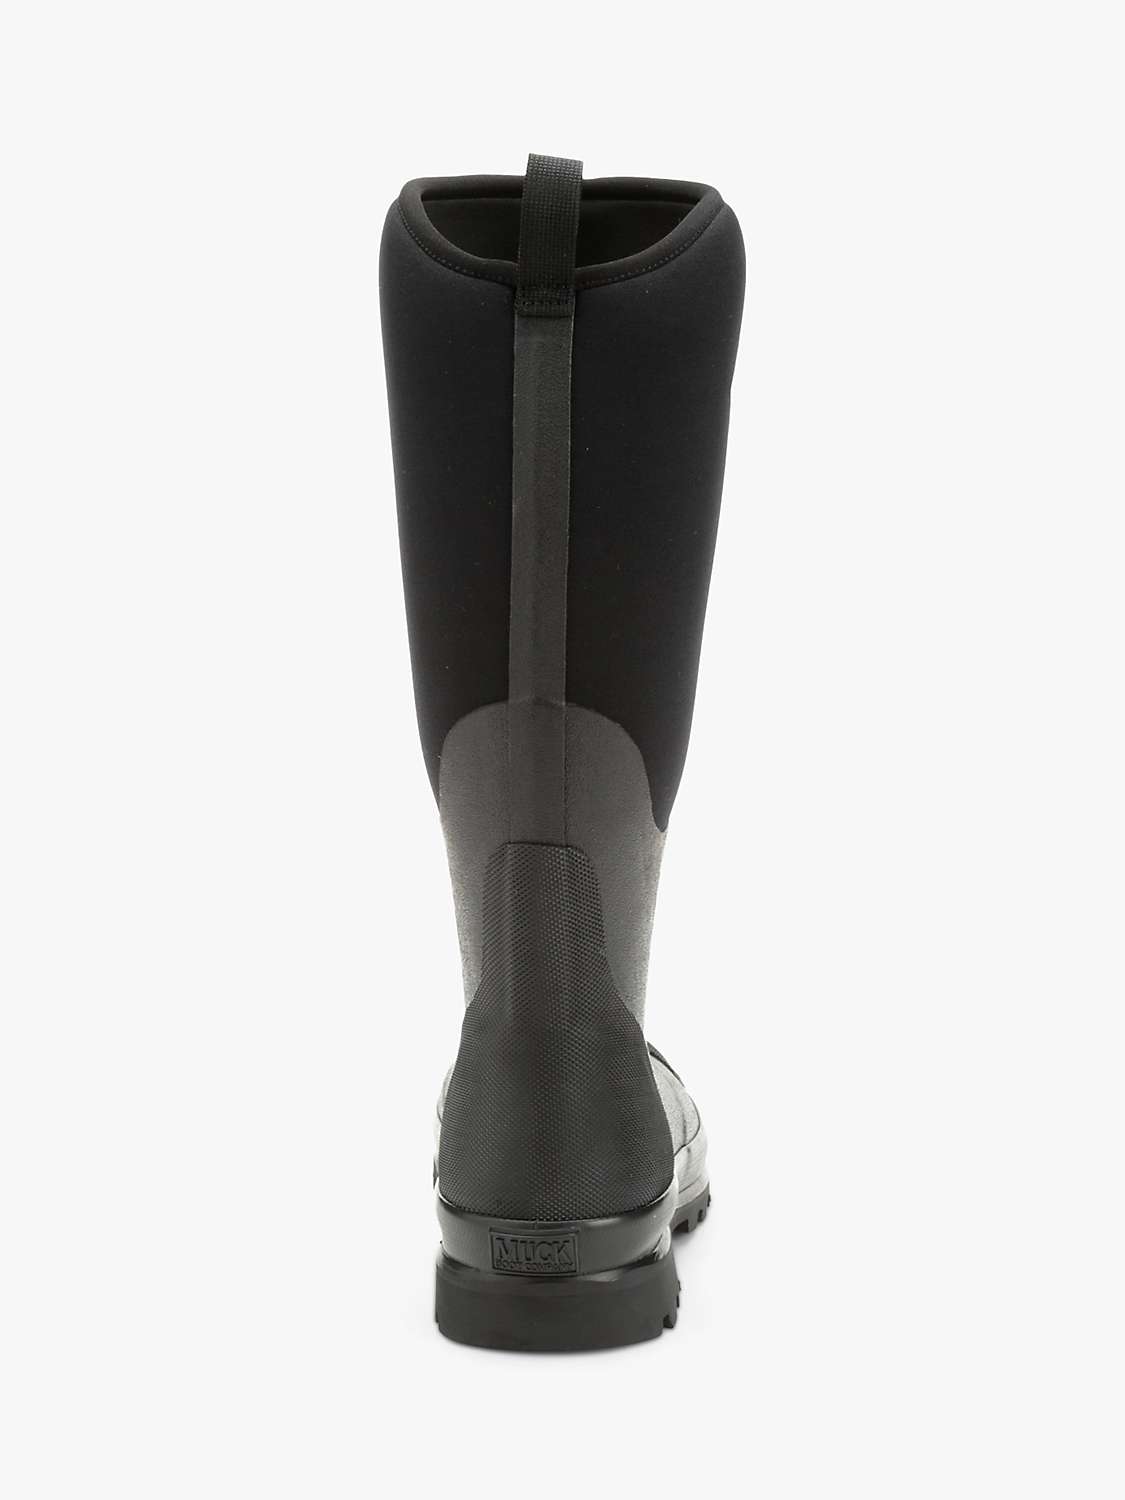 Buy Muck Chore Classic Tall Wellington Boots, Black Online at johnlewis.com